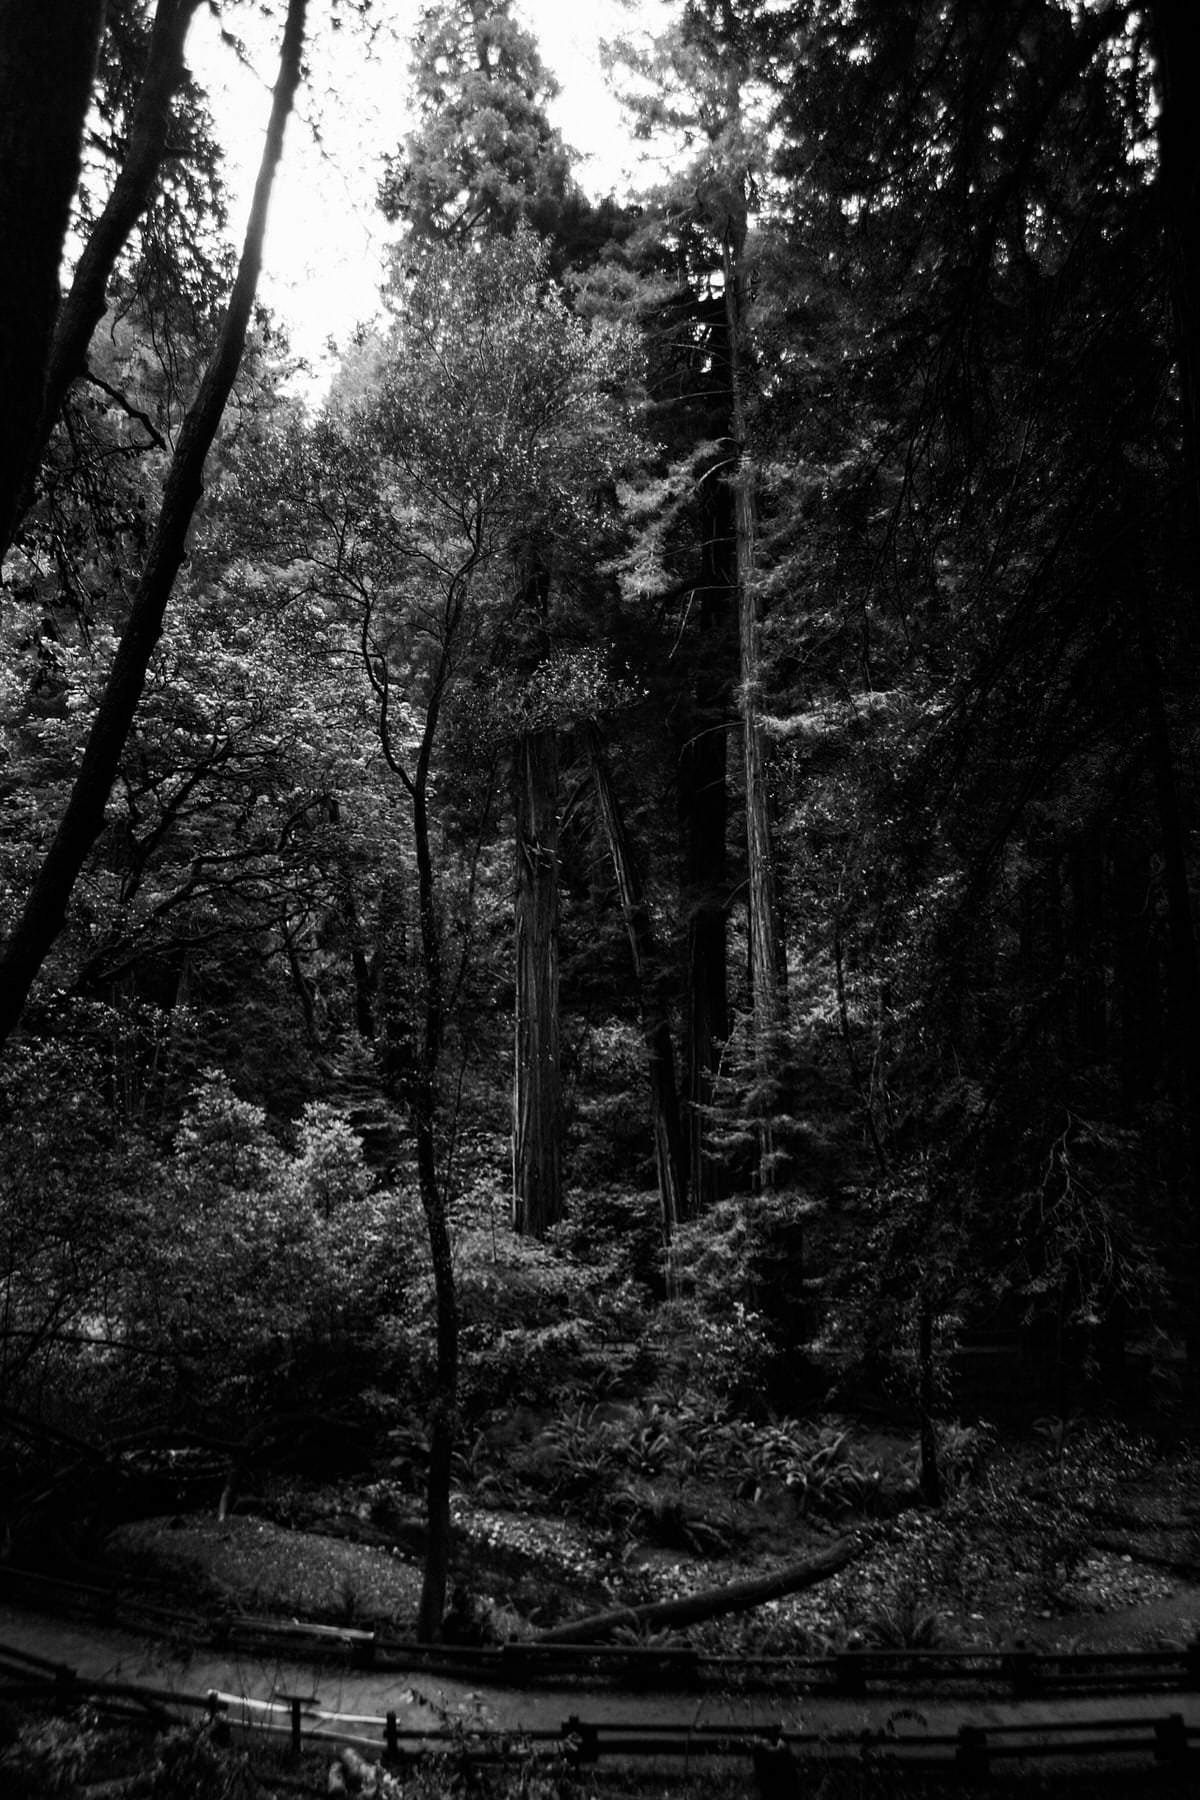 Muir-Woods-National-Monument-California-black-and-white-fine-art-photography-by-Studio-L-photographer-Laura-Schneider-_3577